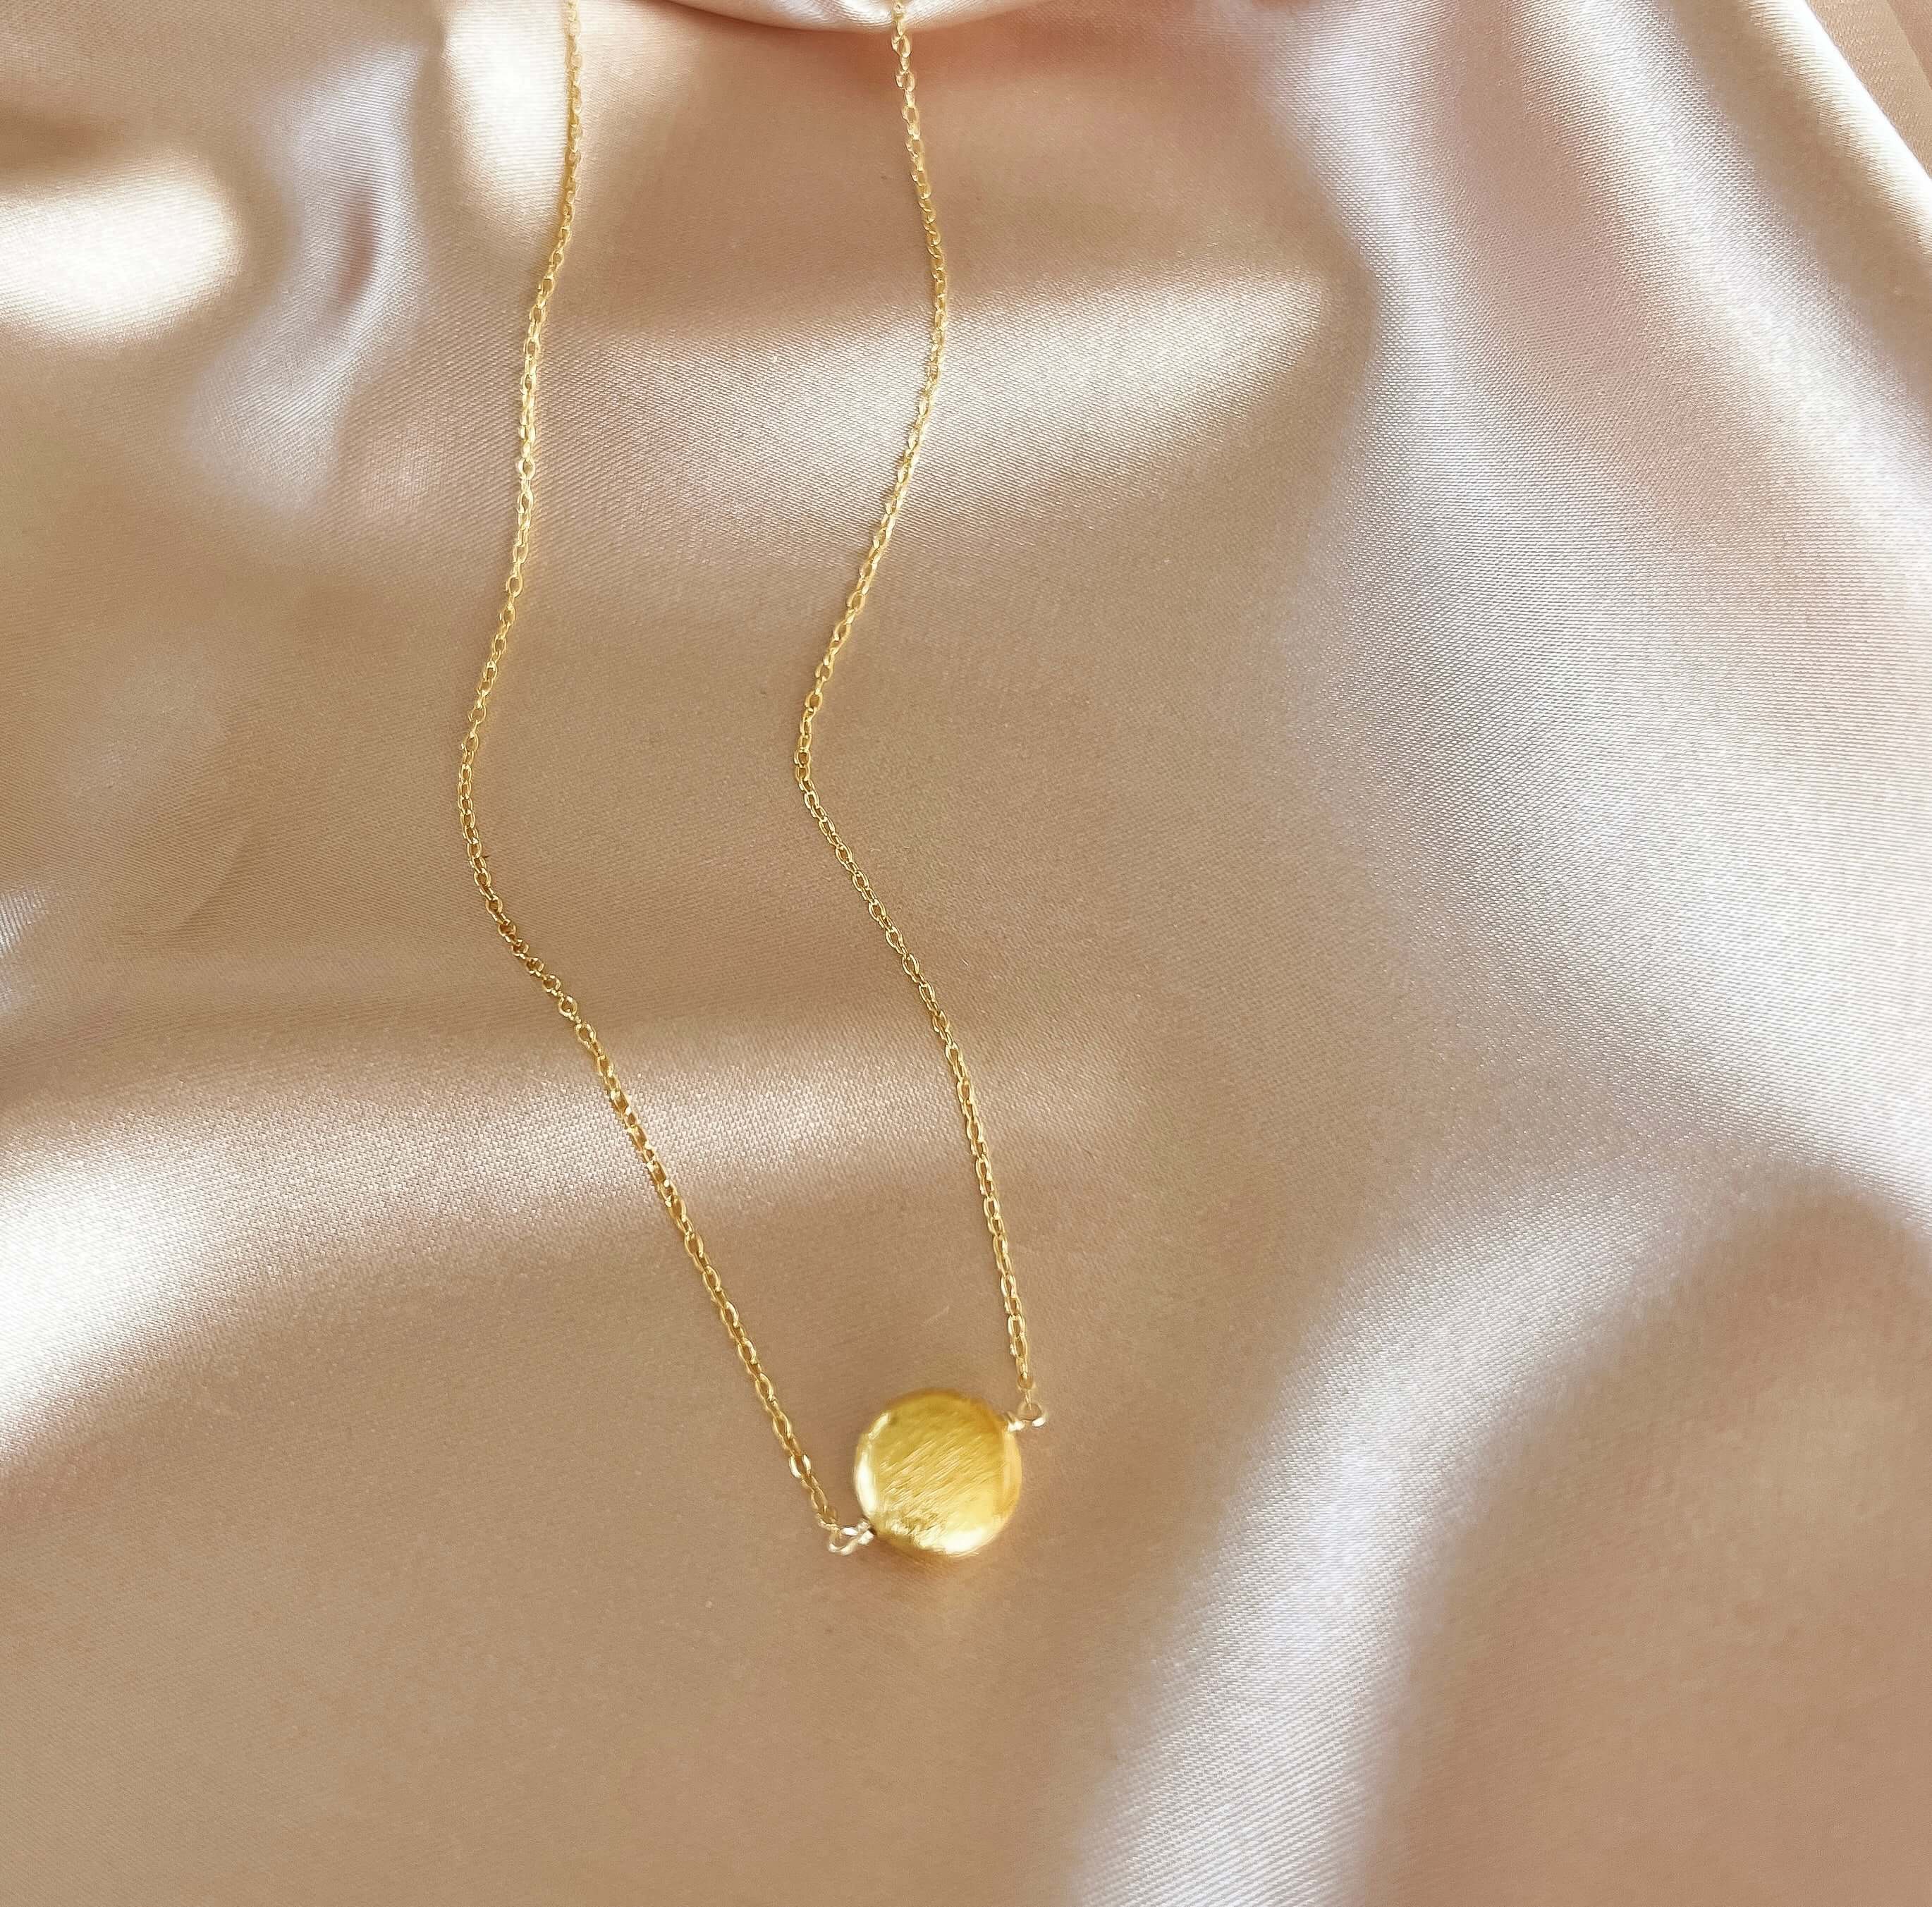 Minimalist 14k Gold Disc Pendant, Handcrafted for Adaptable Necklace Layering